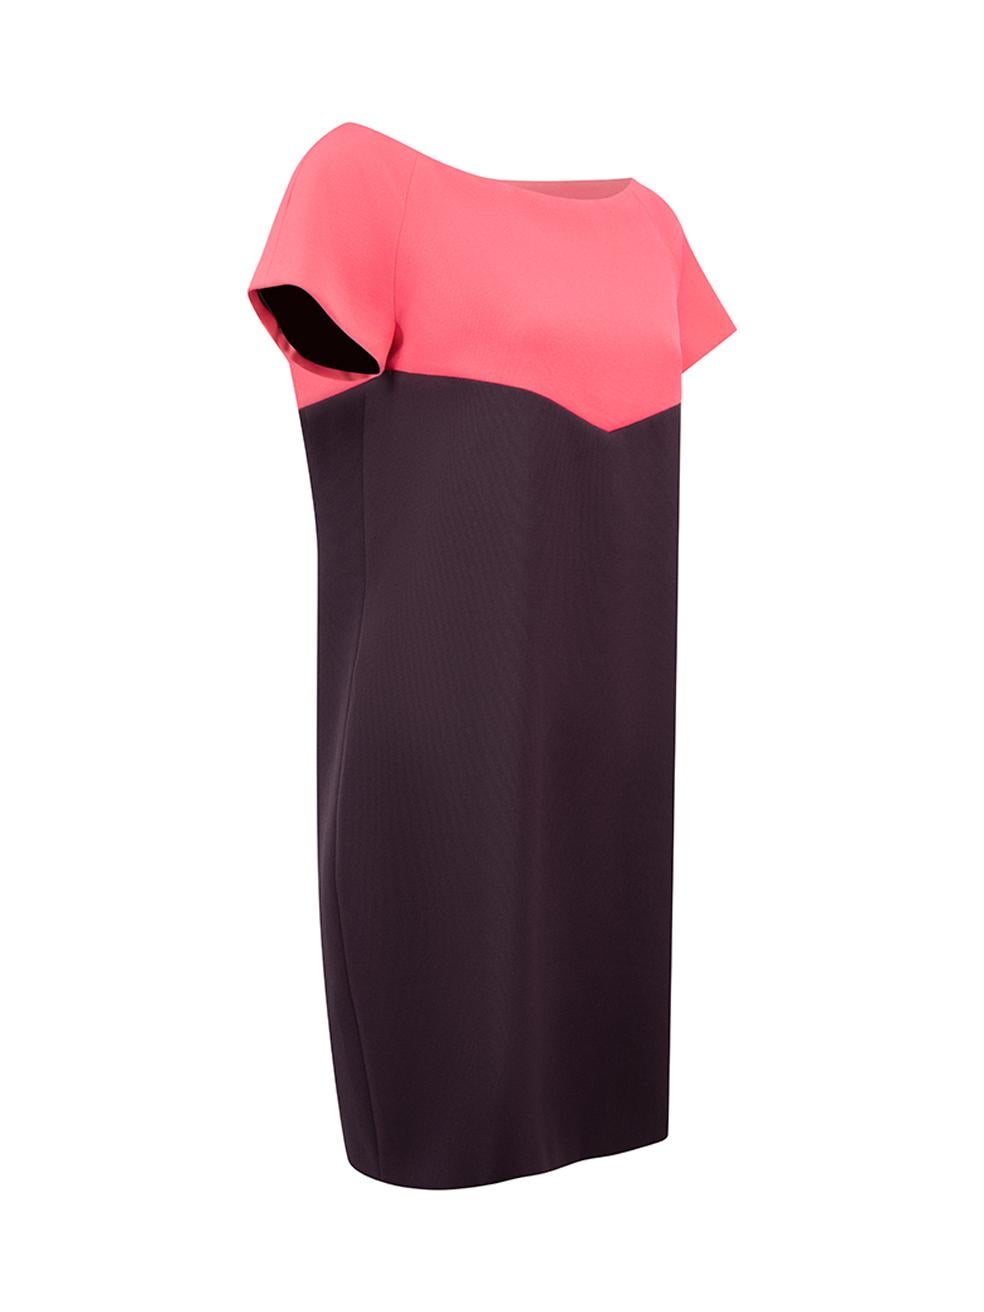 CONDITION is Very good. Minimal wear to dress is evident. Minimal wear to the underarm lining with slight discolouration on this used Versace designer resale item.





Details


Purple and pink

Polyester

Dress

Colour block design

Round